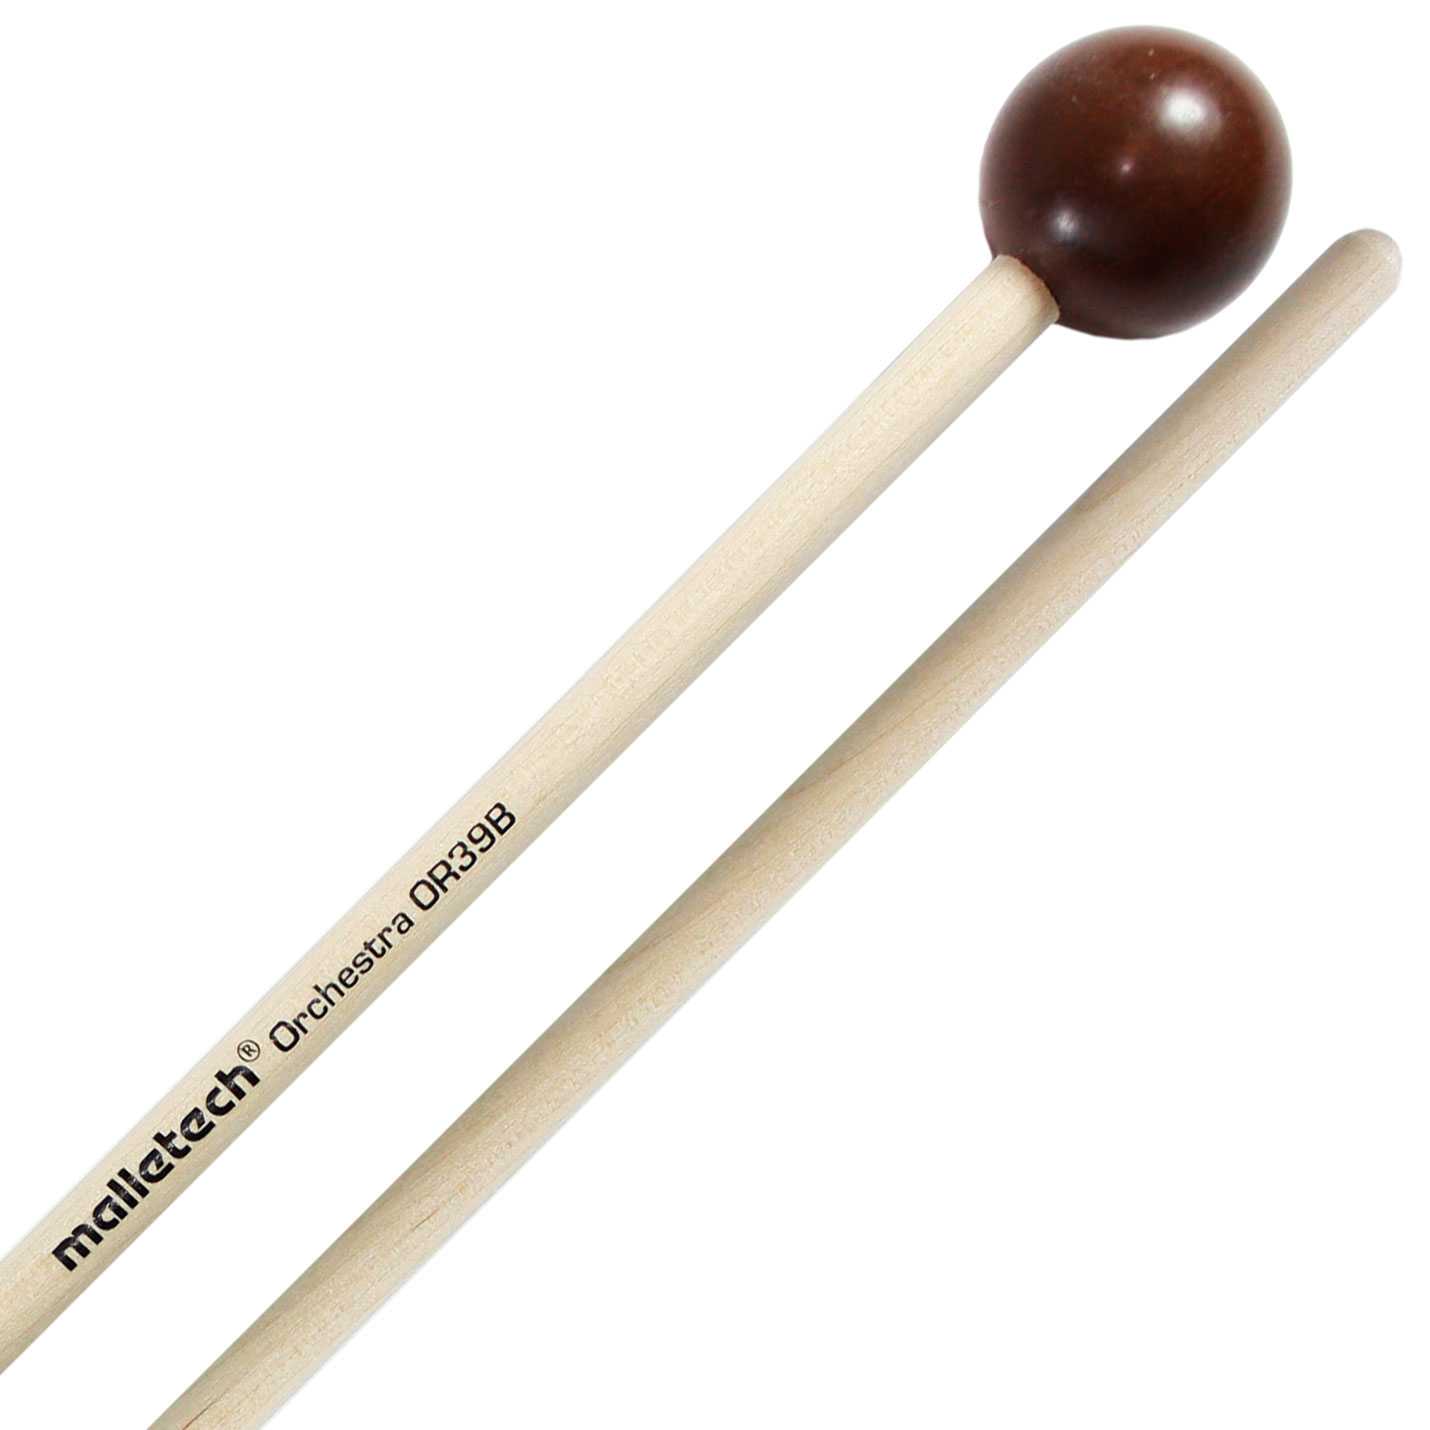 Malletech OR39 Orchestra Series Hard Light Weight Xylophone Mallets